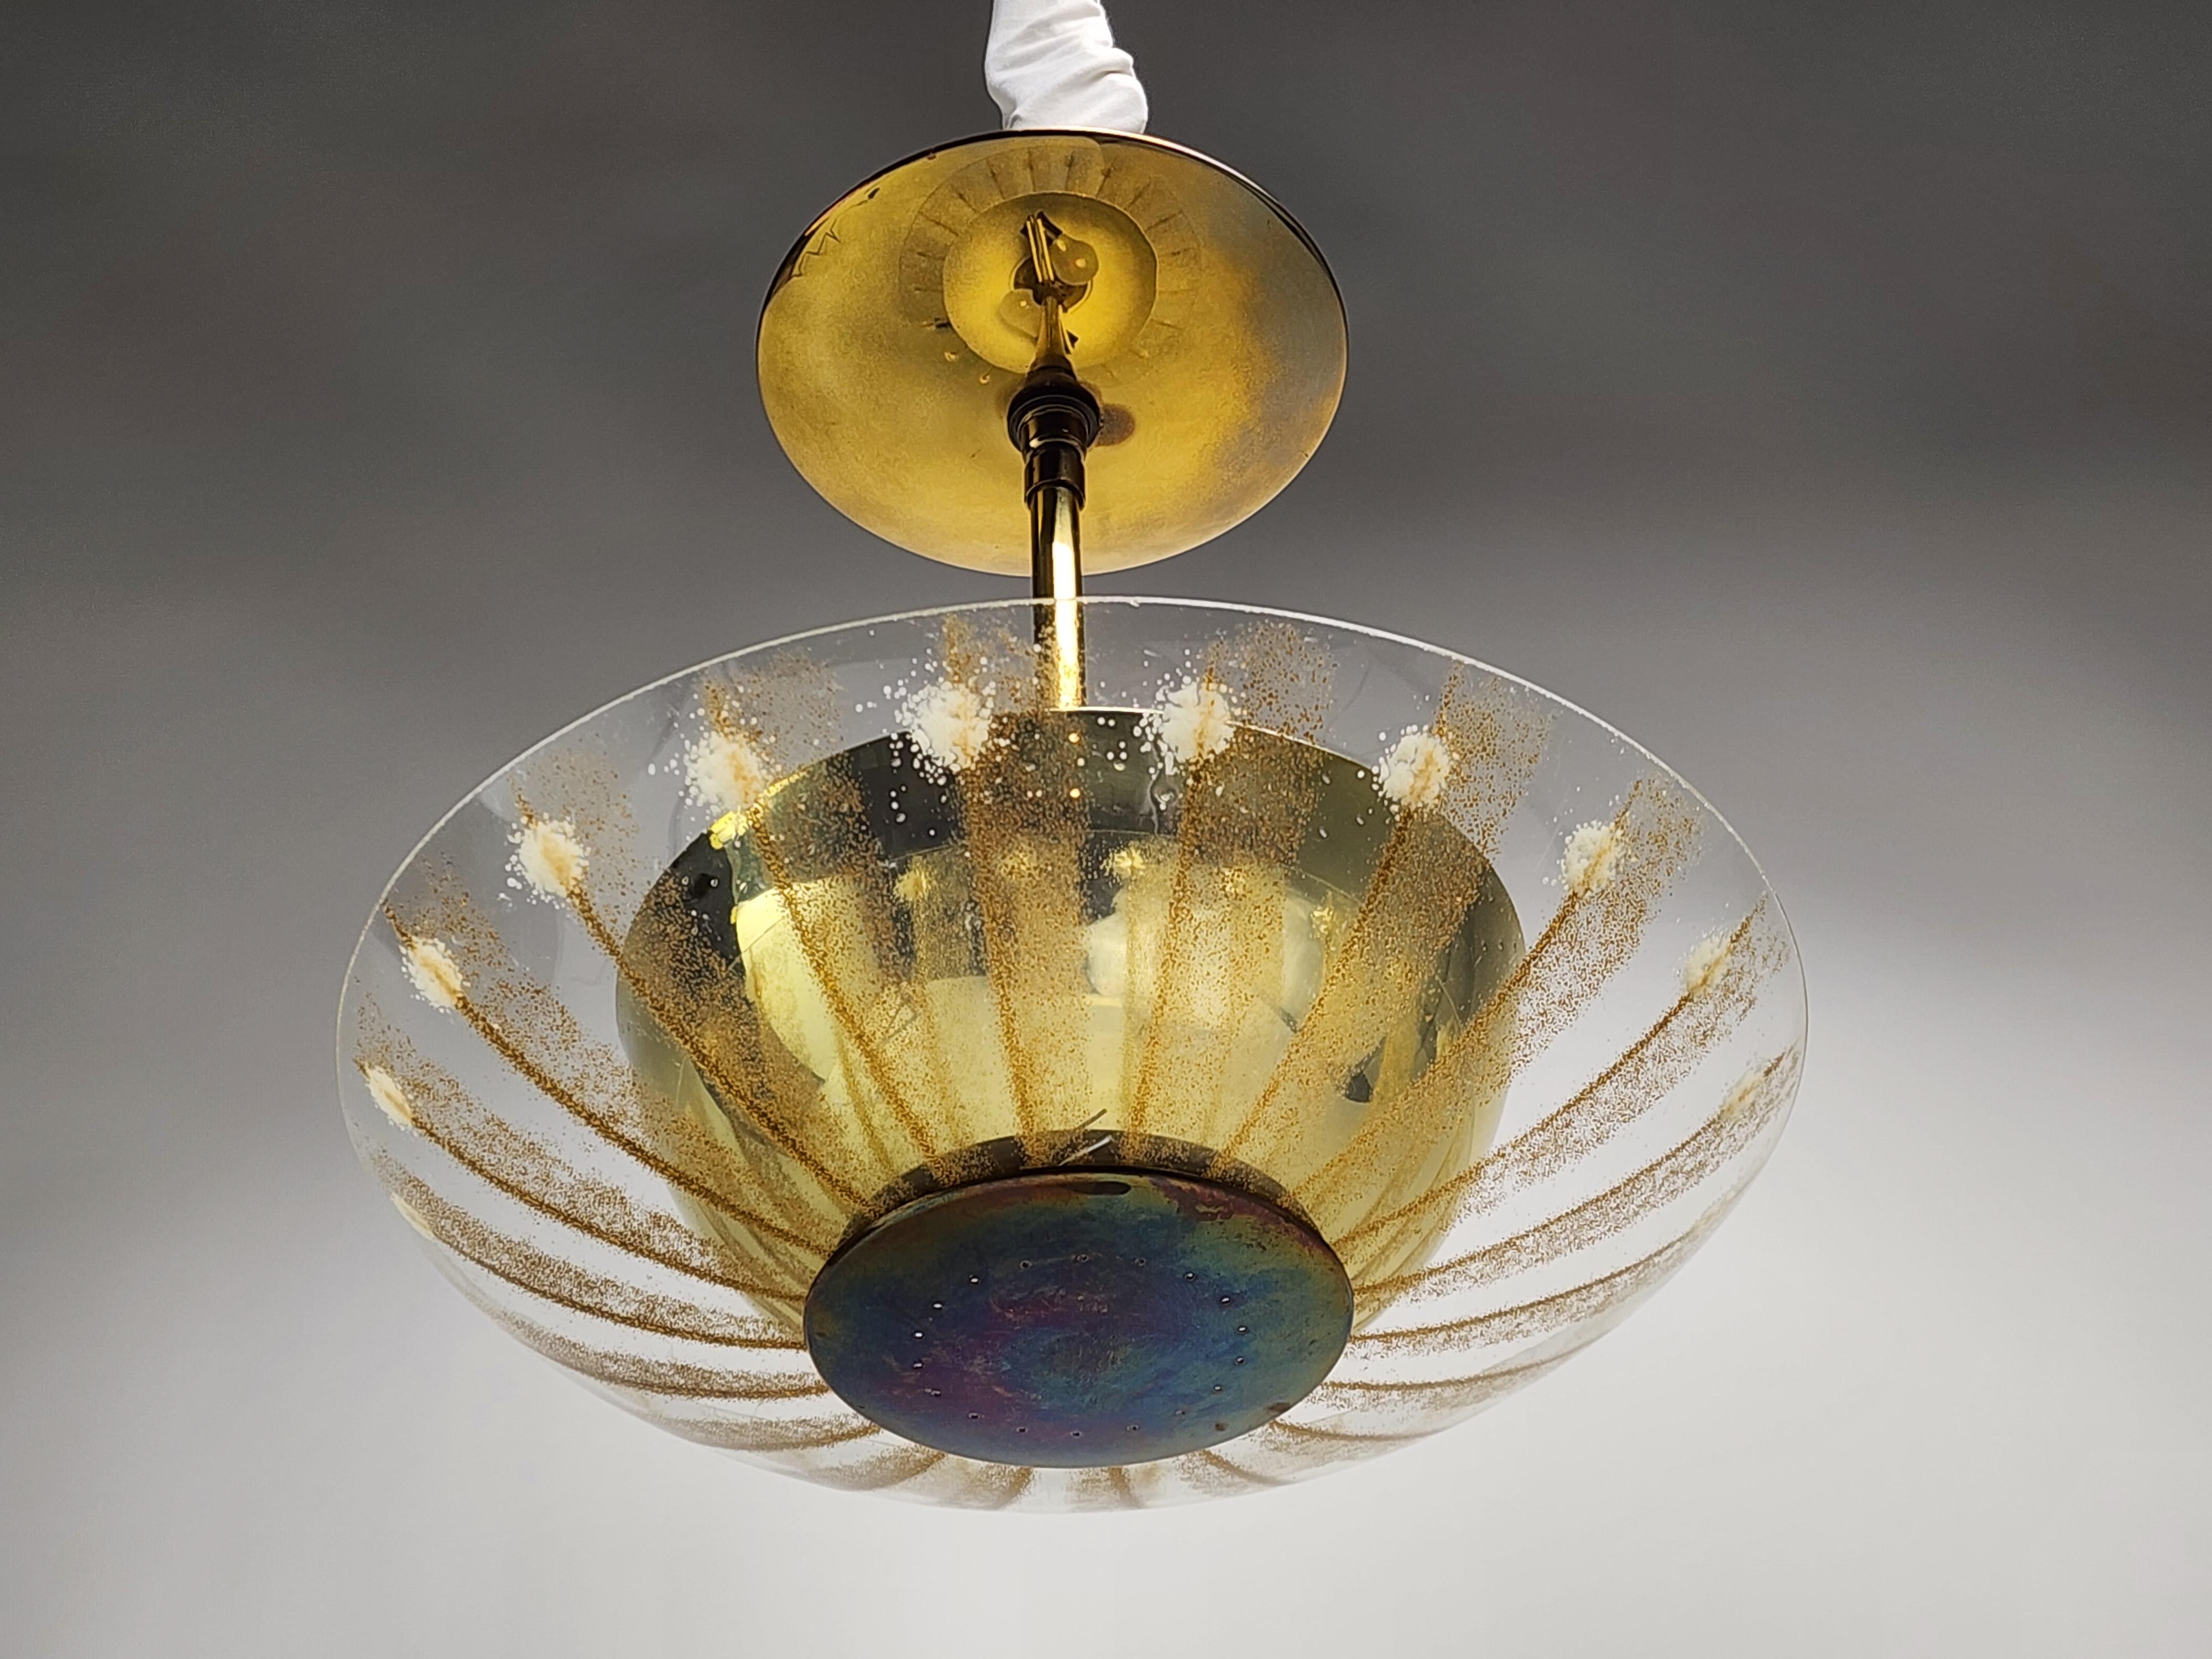 Gerald Thurston pendant. 

Texturized gold powdered stripe on glass shade, brass pierced cup and pierced large ring under add sparkling detail on this fixture. 

Contain 2 E26 size socket rated at 60 watt each.